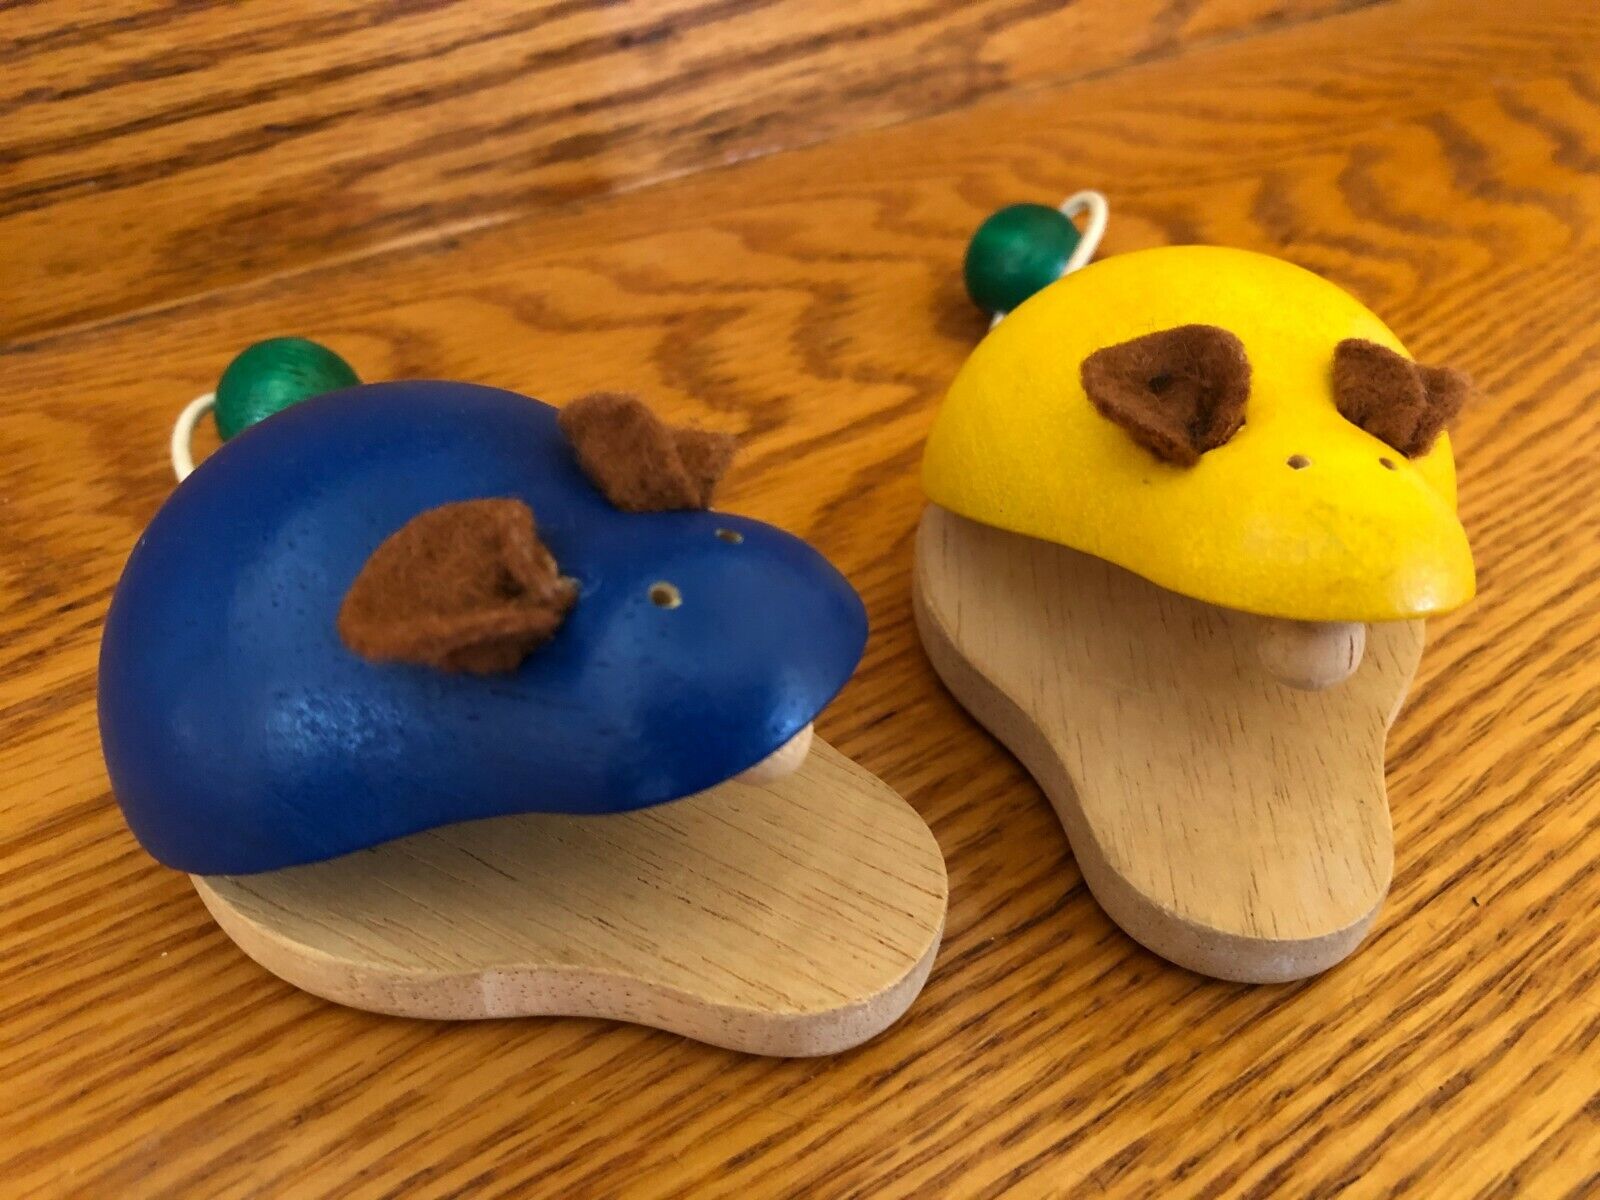 Vintage Pair Wooden Castanets Children's Clapper Instruments by Plan Toys RARE Plan Toys